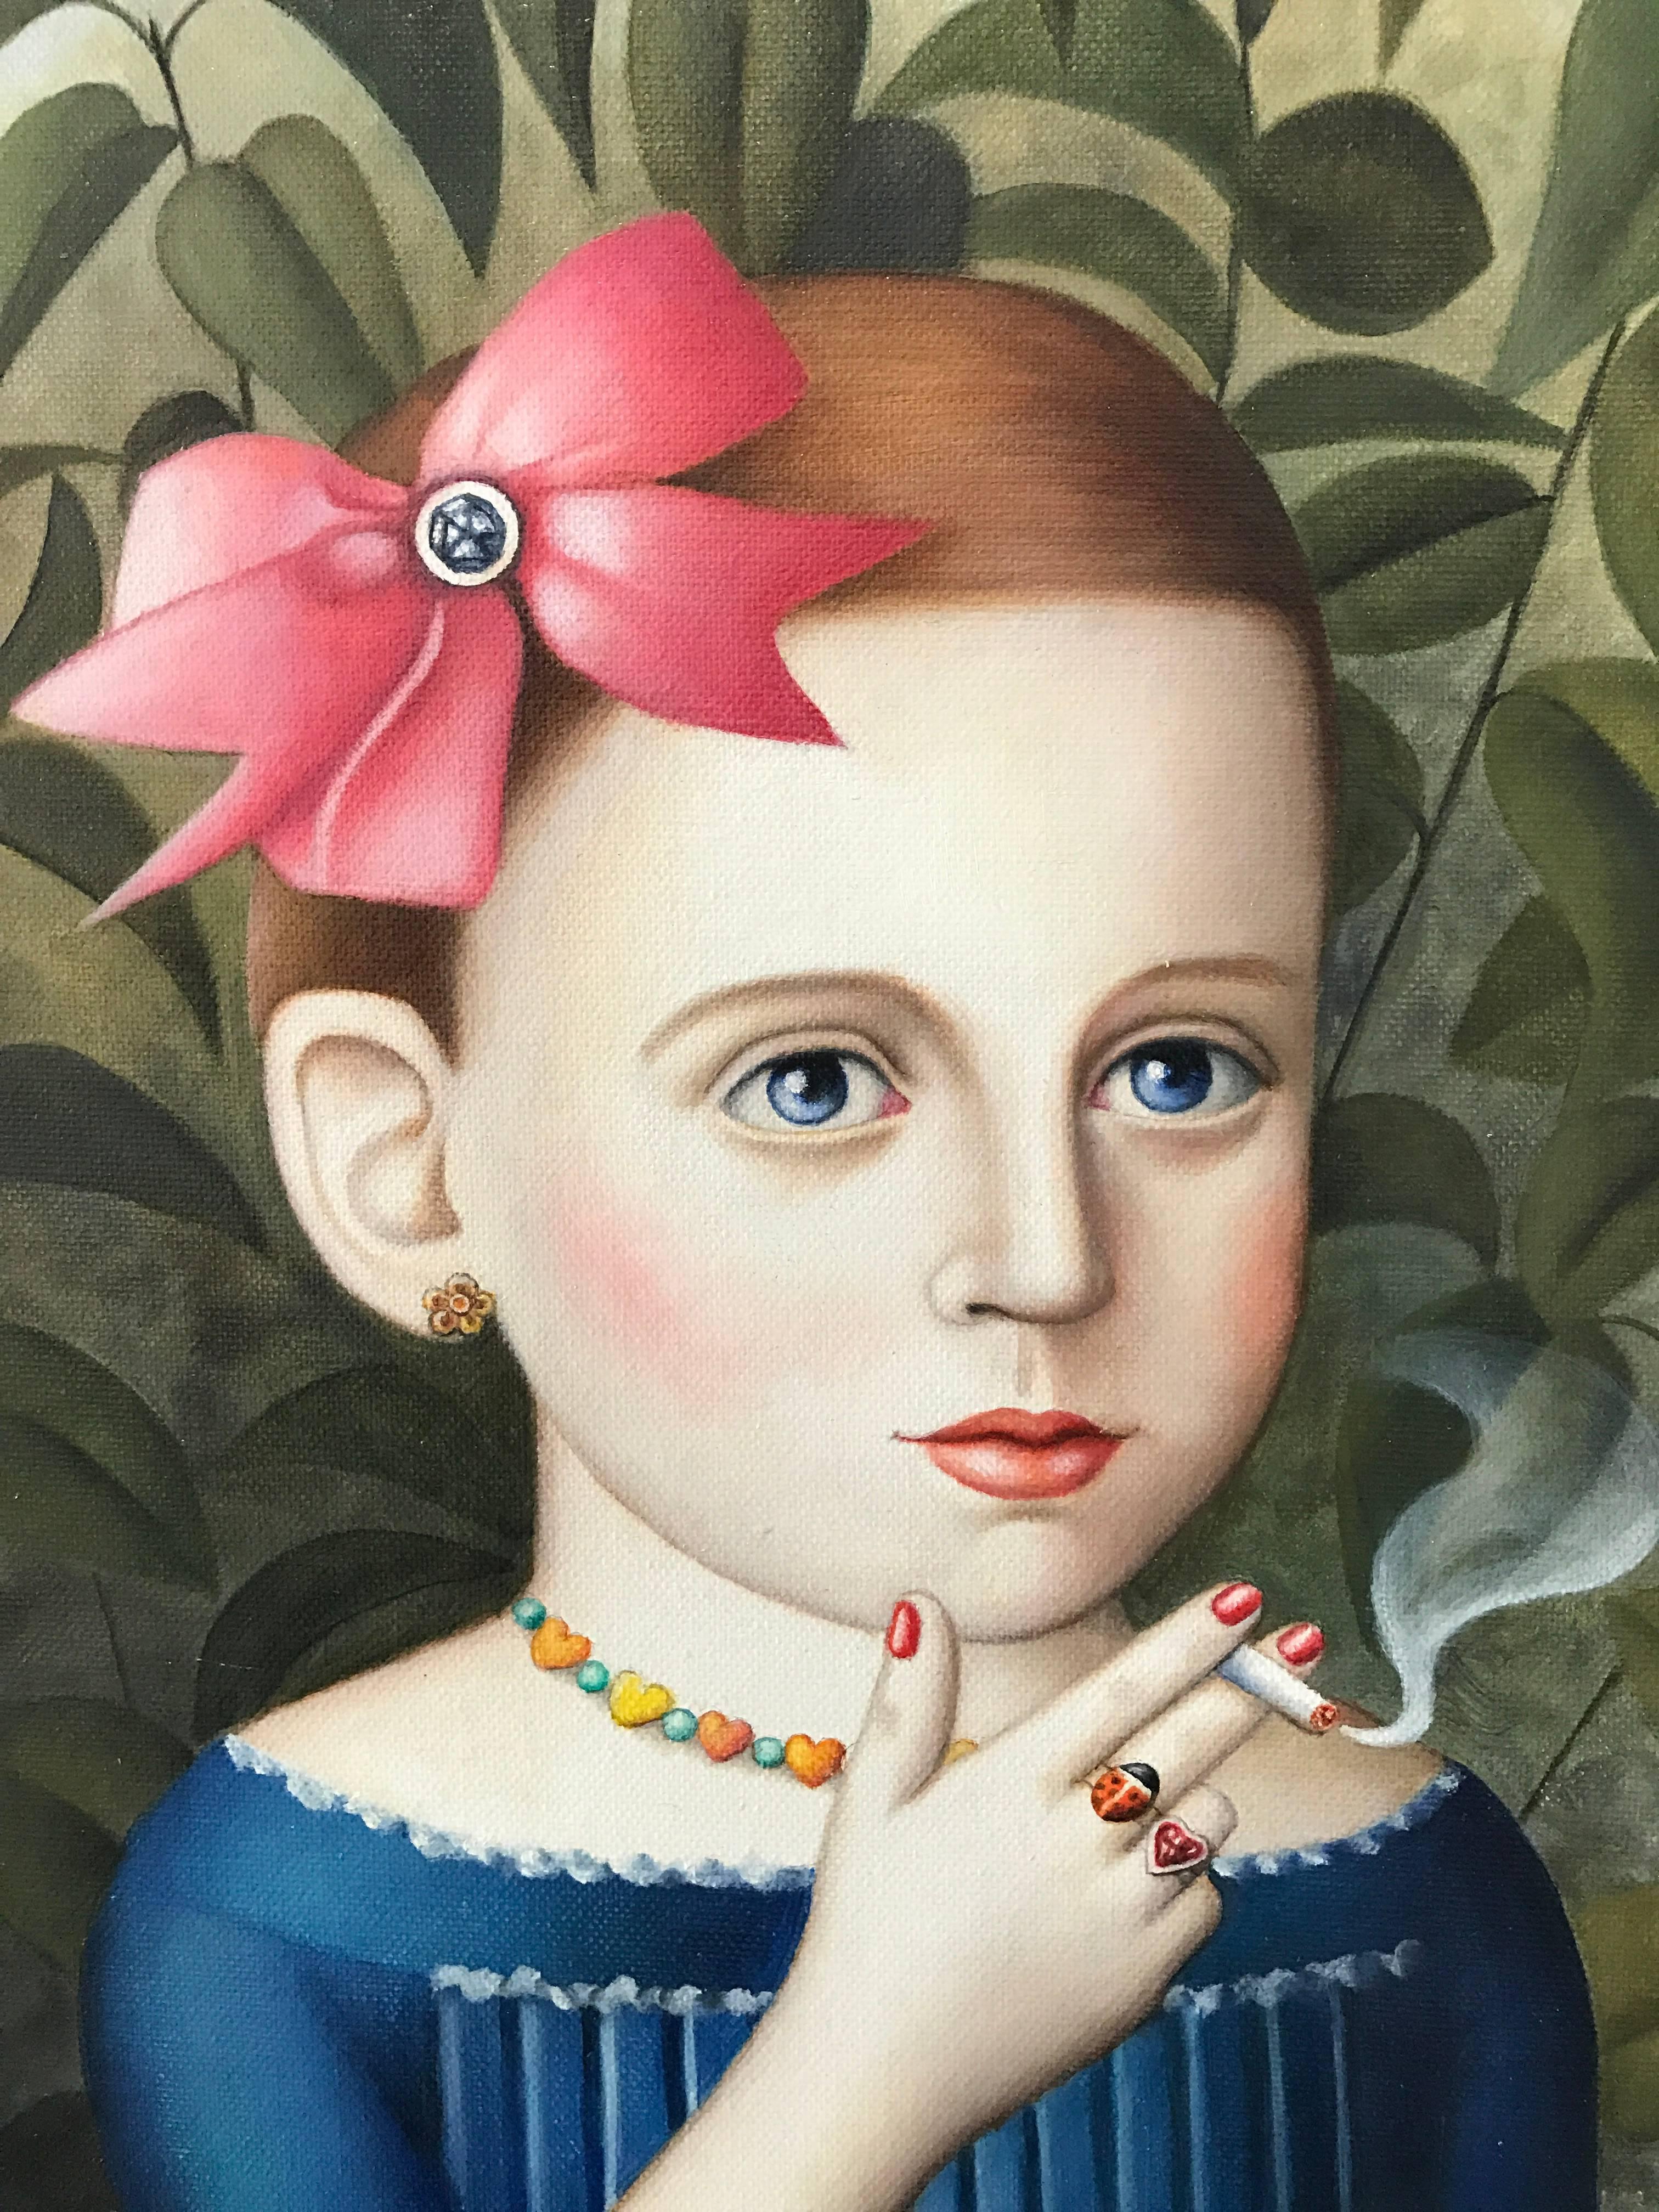 Girl With Tea Set - Painting by Amy Hill